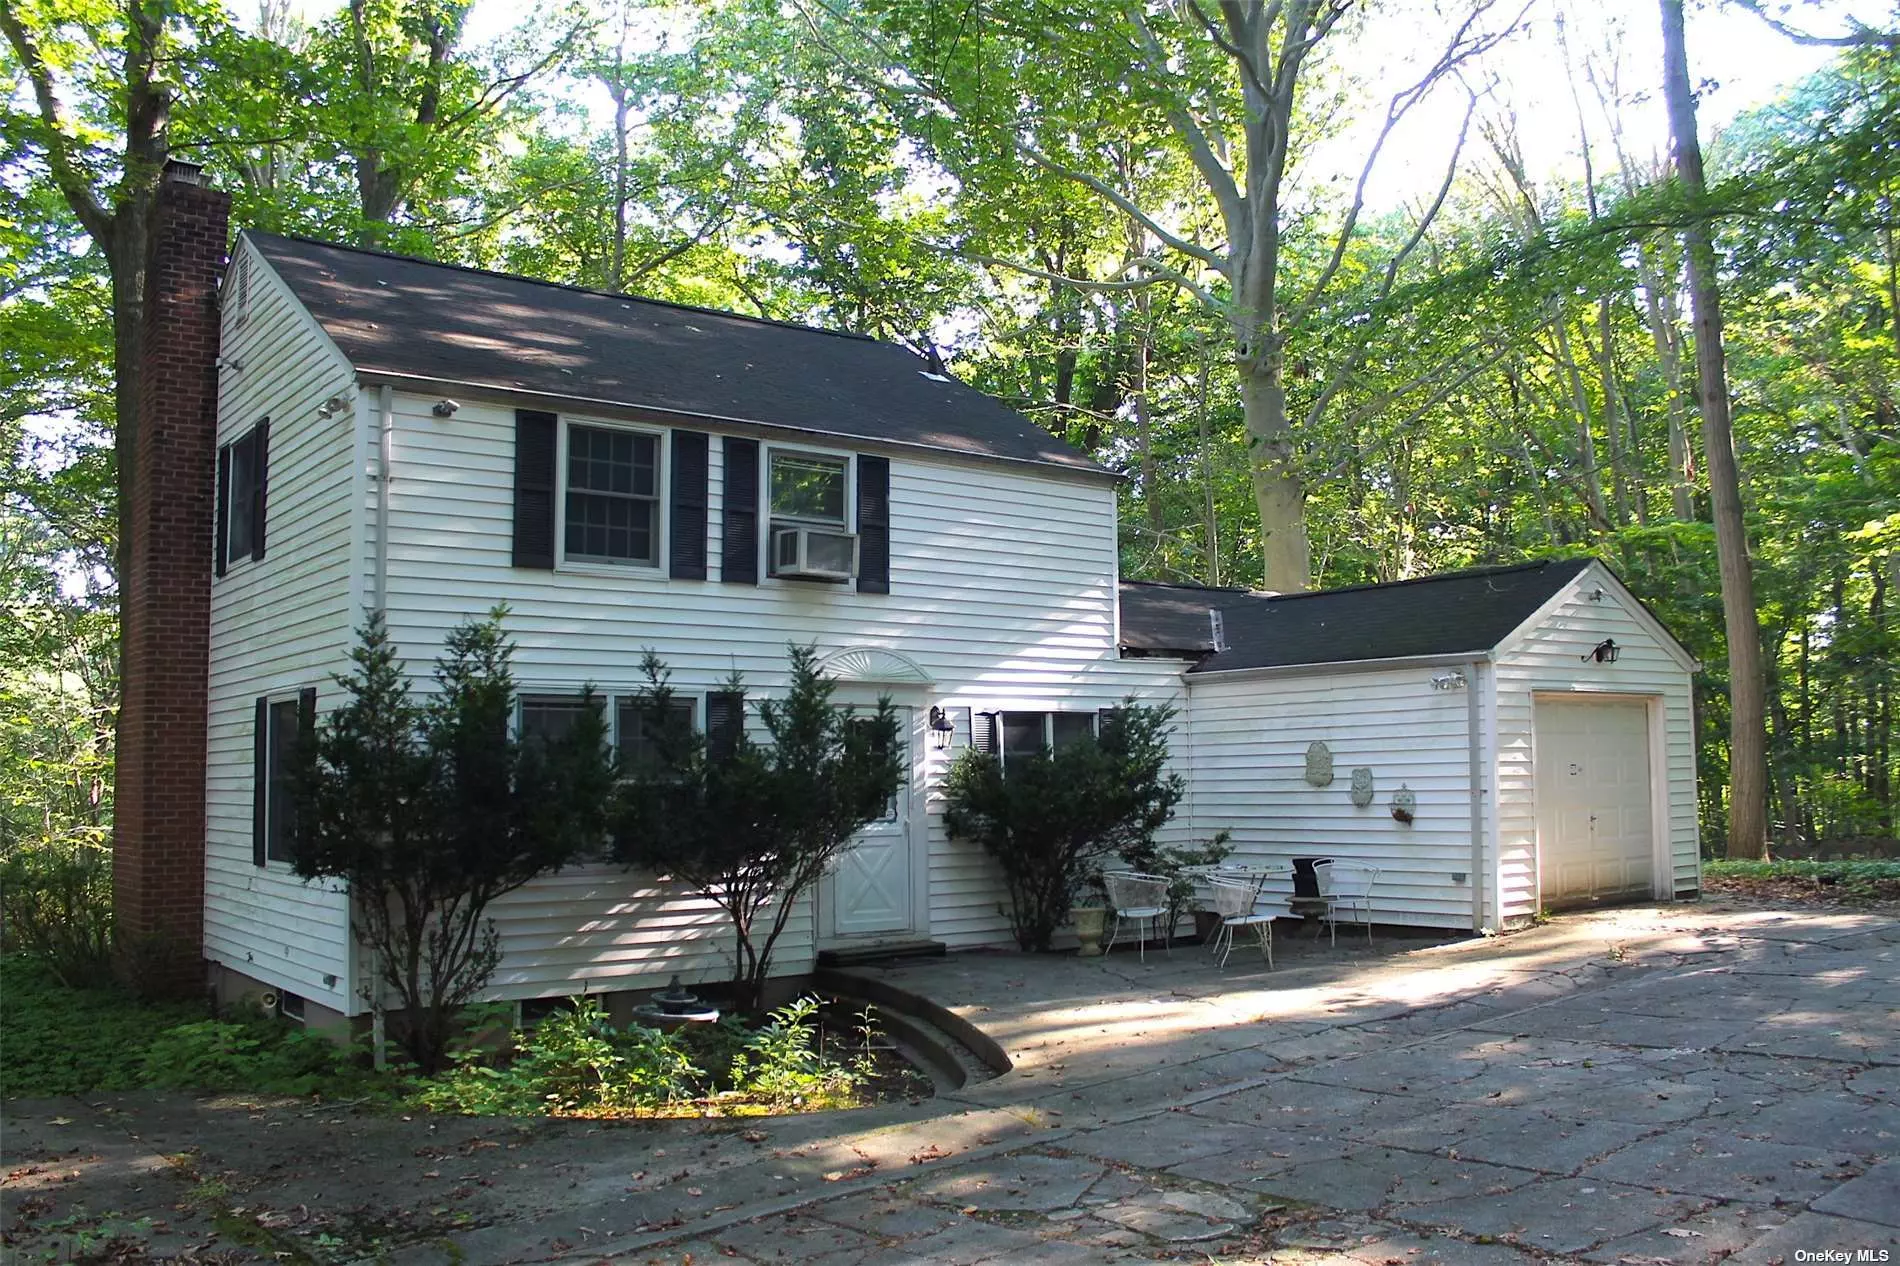 Nissequogue-3 Bedroom Colonial on 2.5 acres Property runs from Spring Hollow RD to Frog Hollow RD. 1.5 baths, Brick Fire Place, Full basement , Oil Burner 1 car garage. House is sold as-is. Beach rights , Close to Short Beach, Long Beach, Saint James and the LIRR. . $ 659, 000 LOW...LOW TAXES---$ 12, 057. ( True taxes including village )